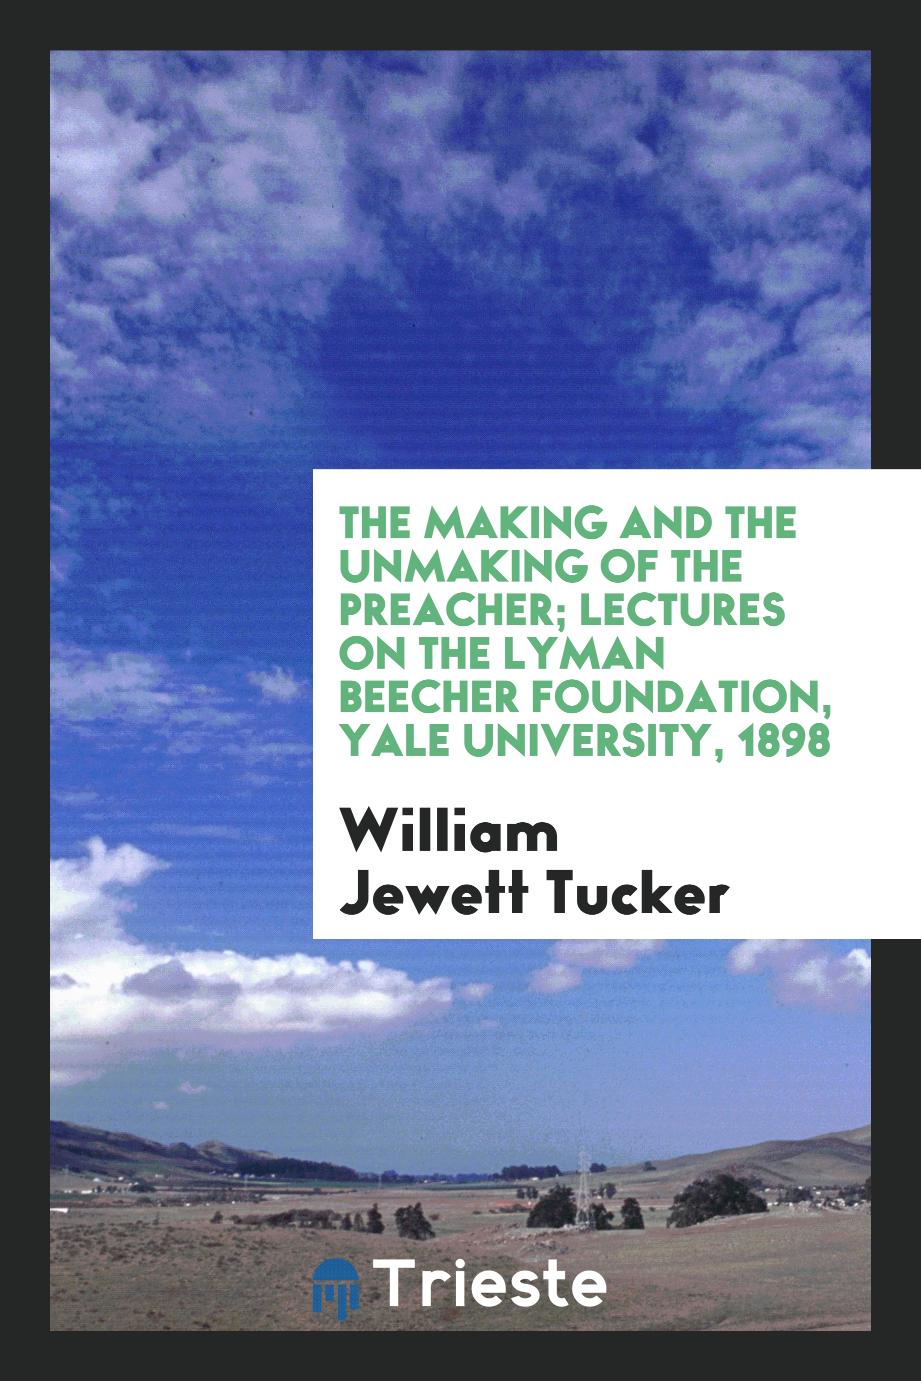 The making and the unmaking of the preacher; lectures on the Lyman Beecher foundation, Yale university, 1898